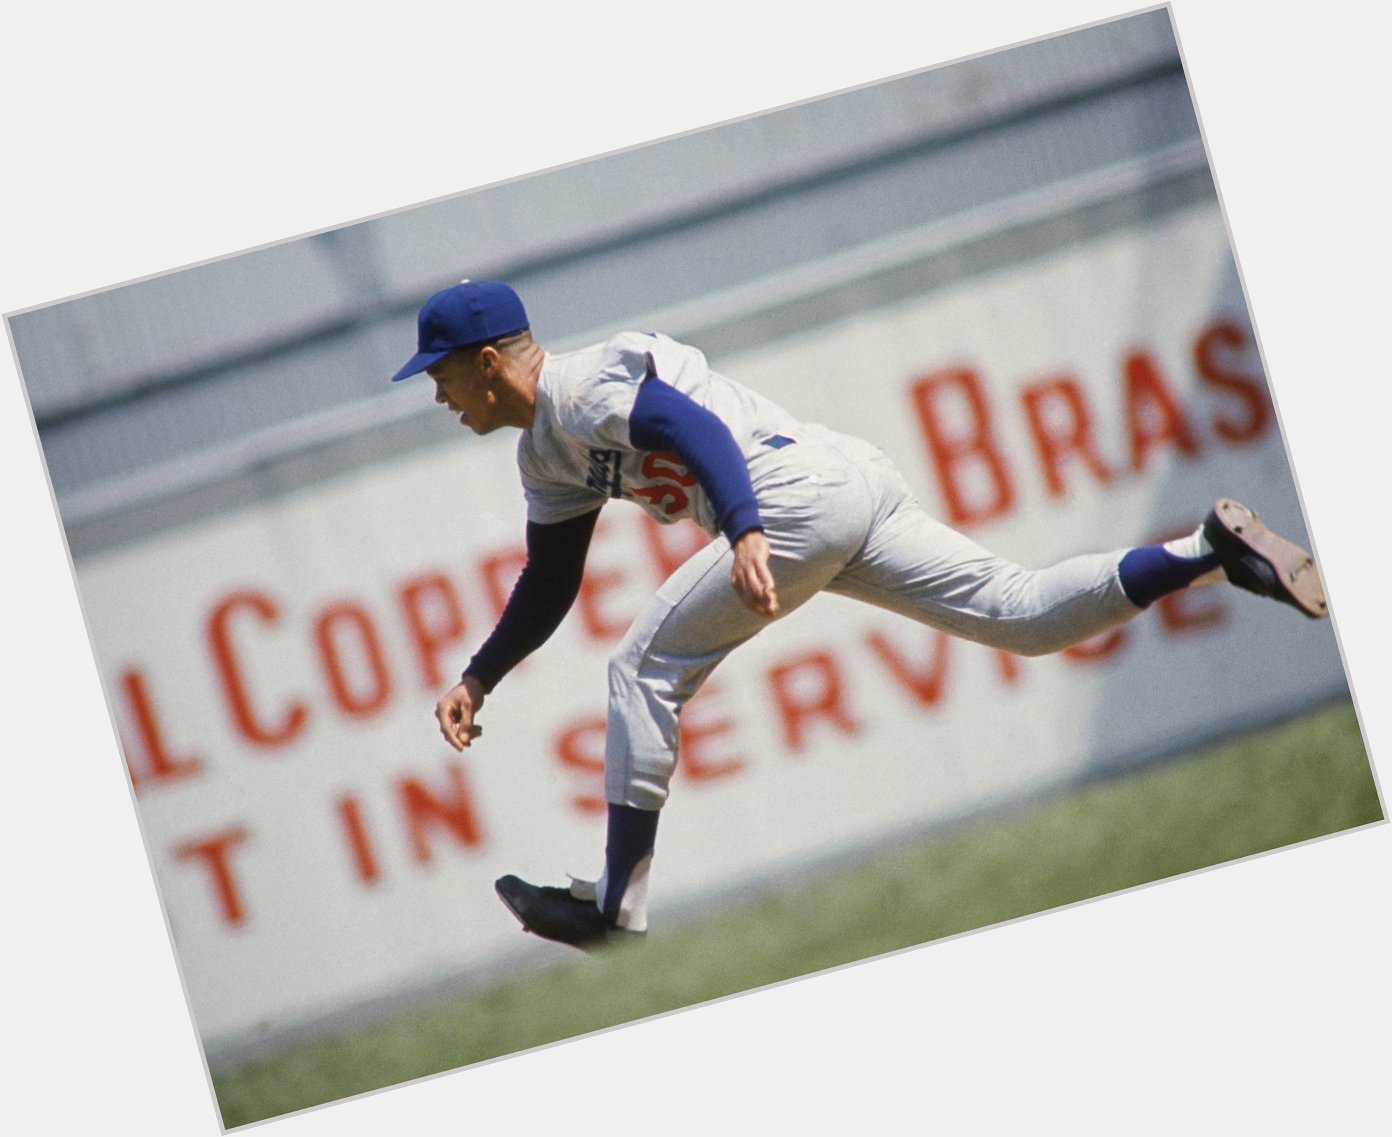 Happy 85th bday to 1962 NL MVP Maury Wills, who hit .299 and stole 104 bases that season for the 